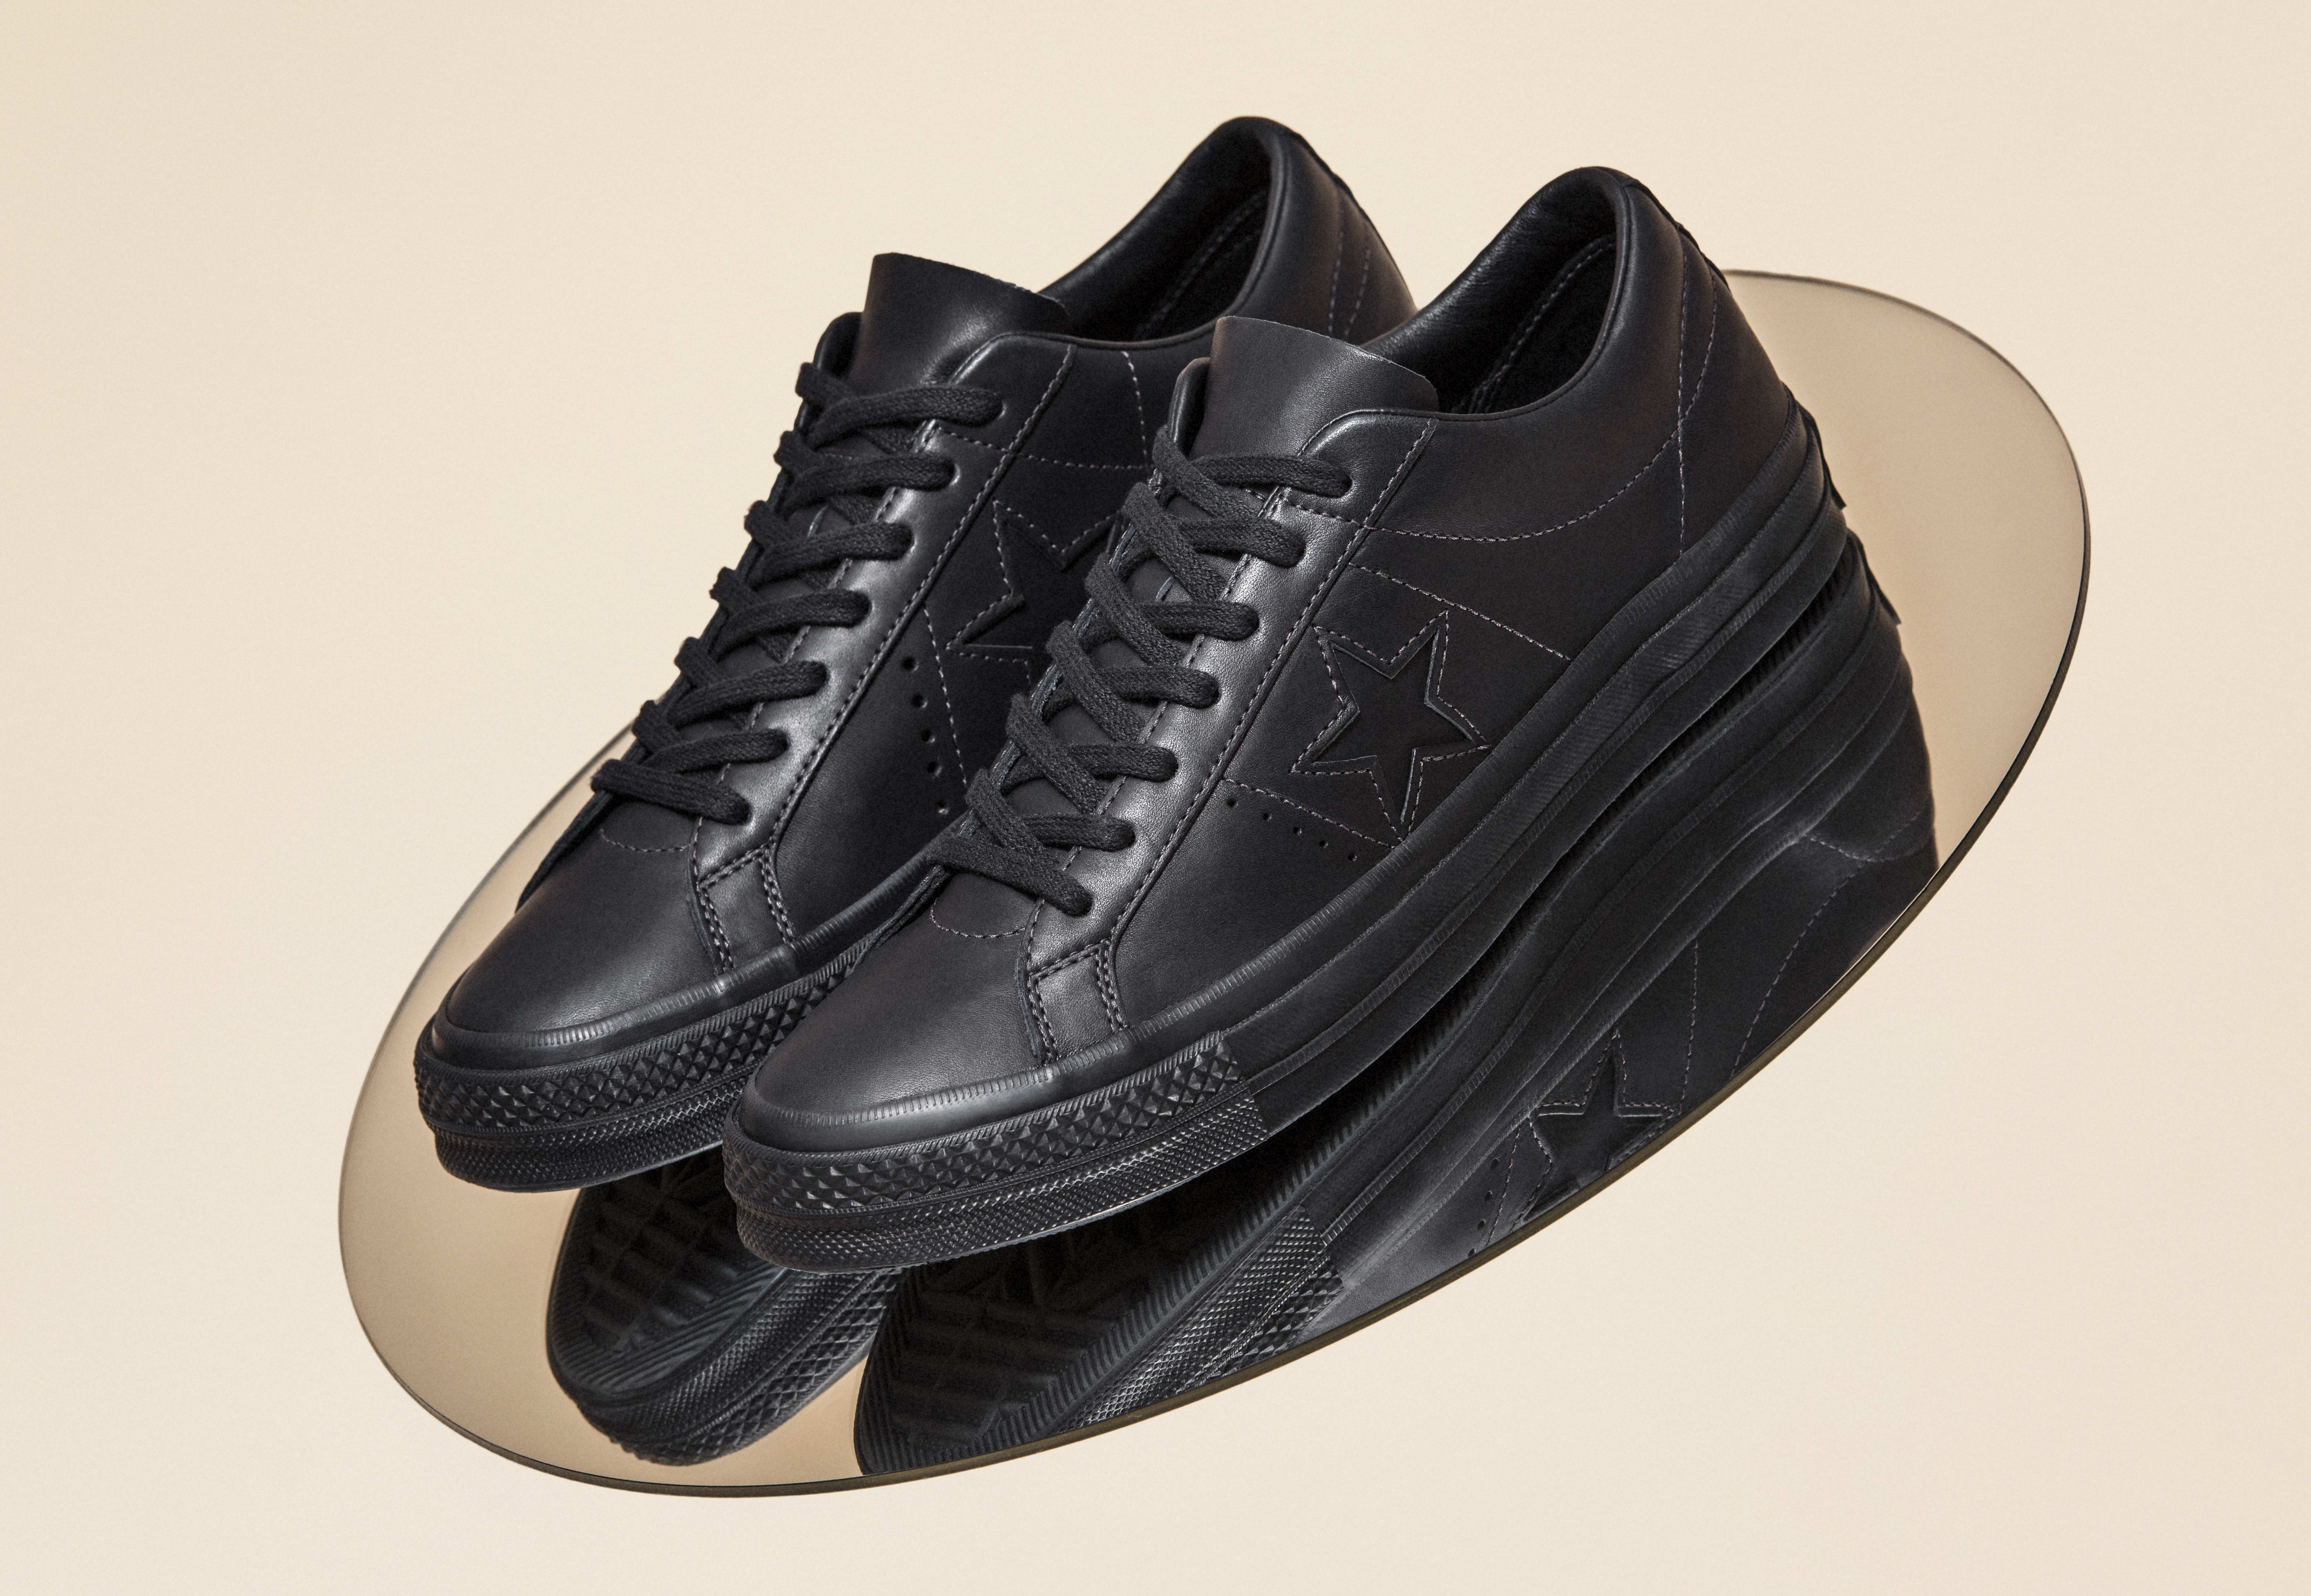 Converse x Engineered Garments One Star Collection (Black)